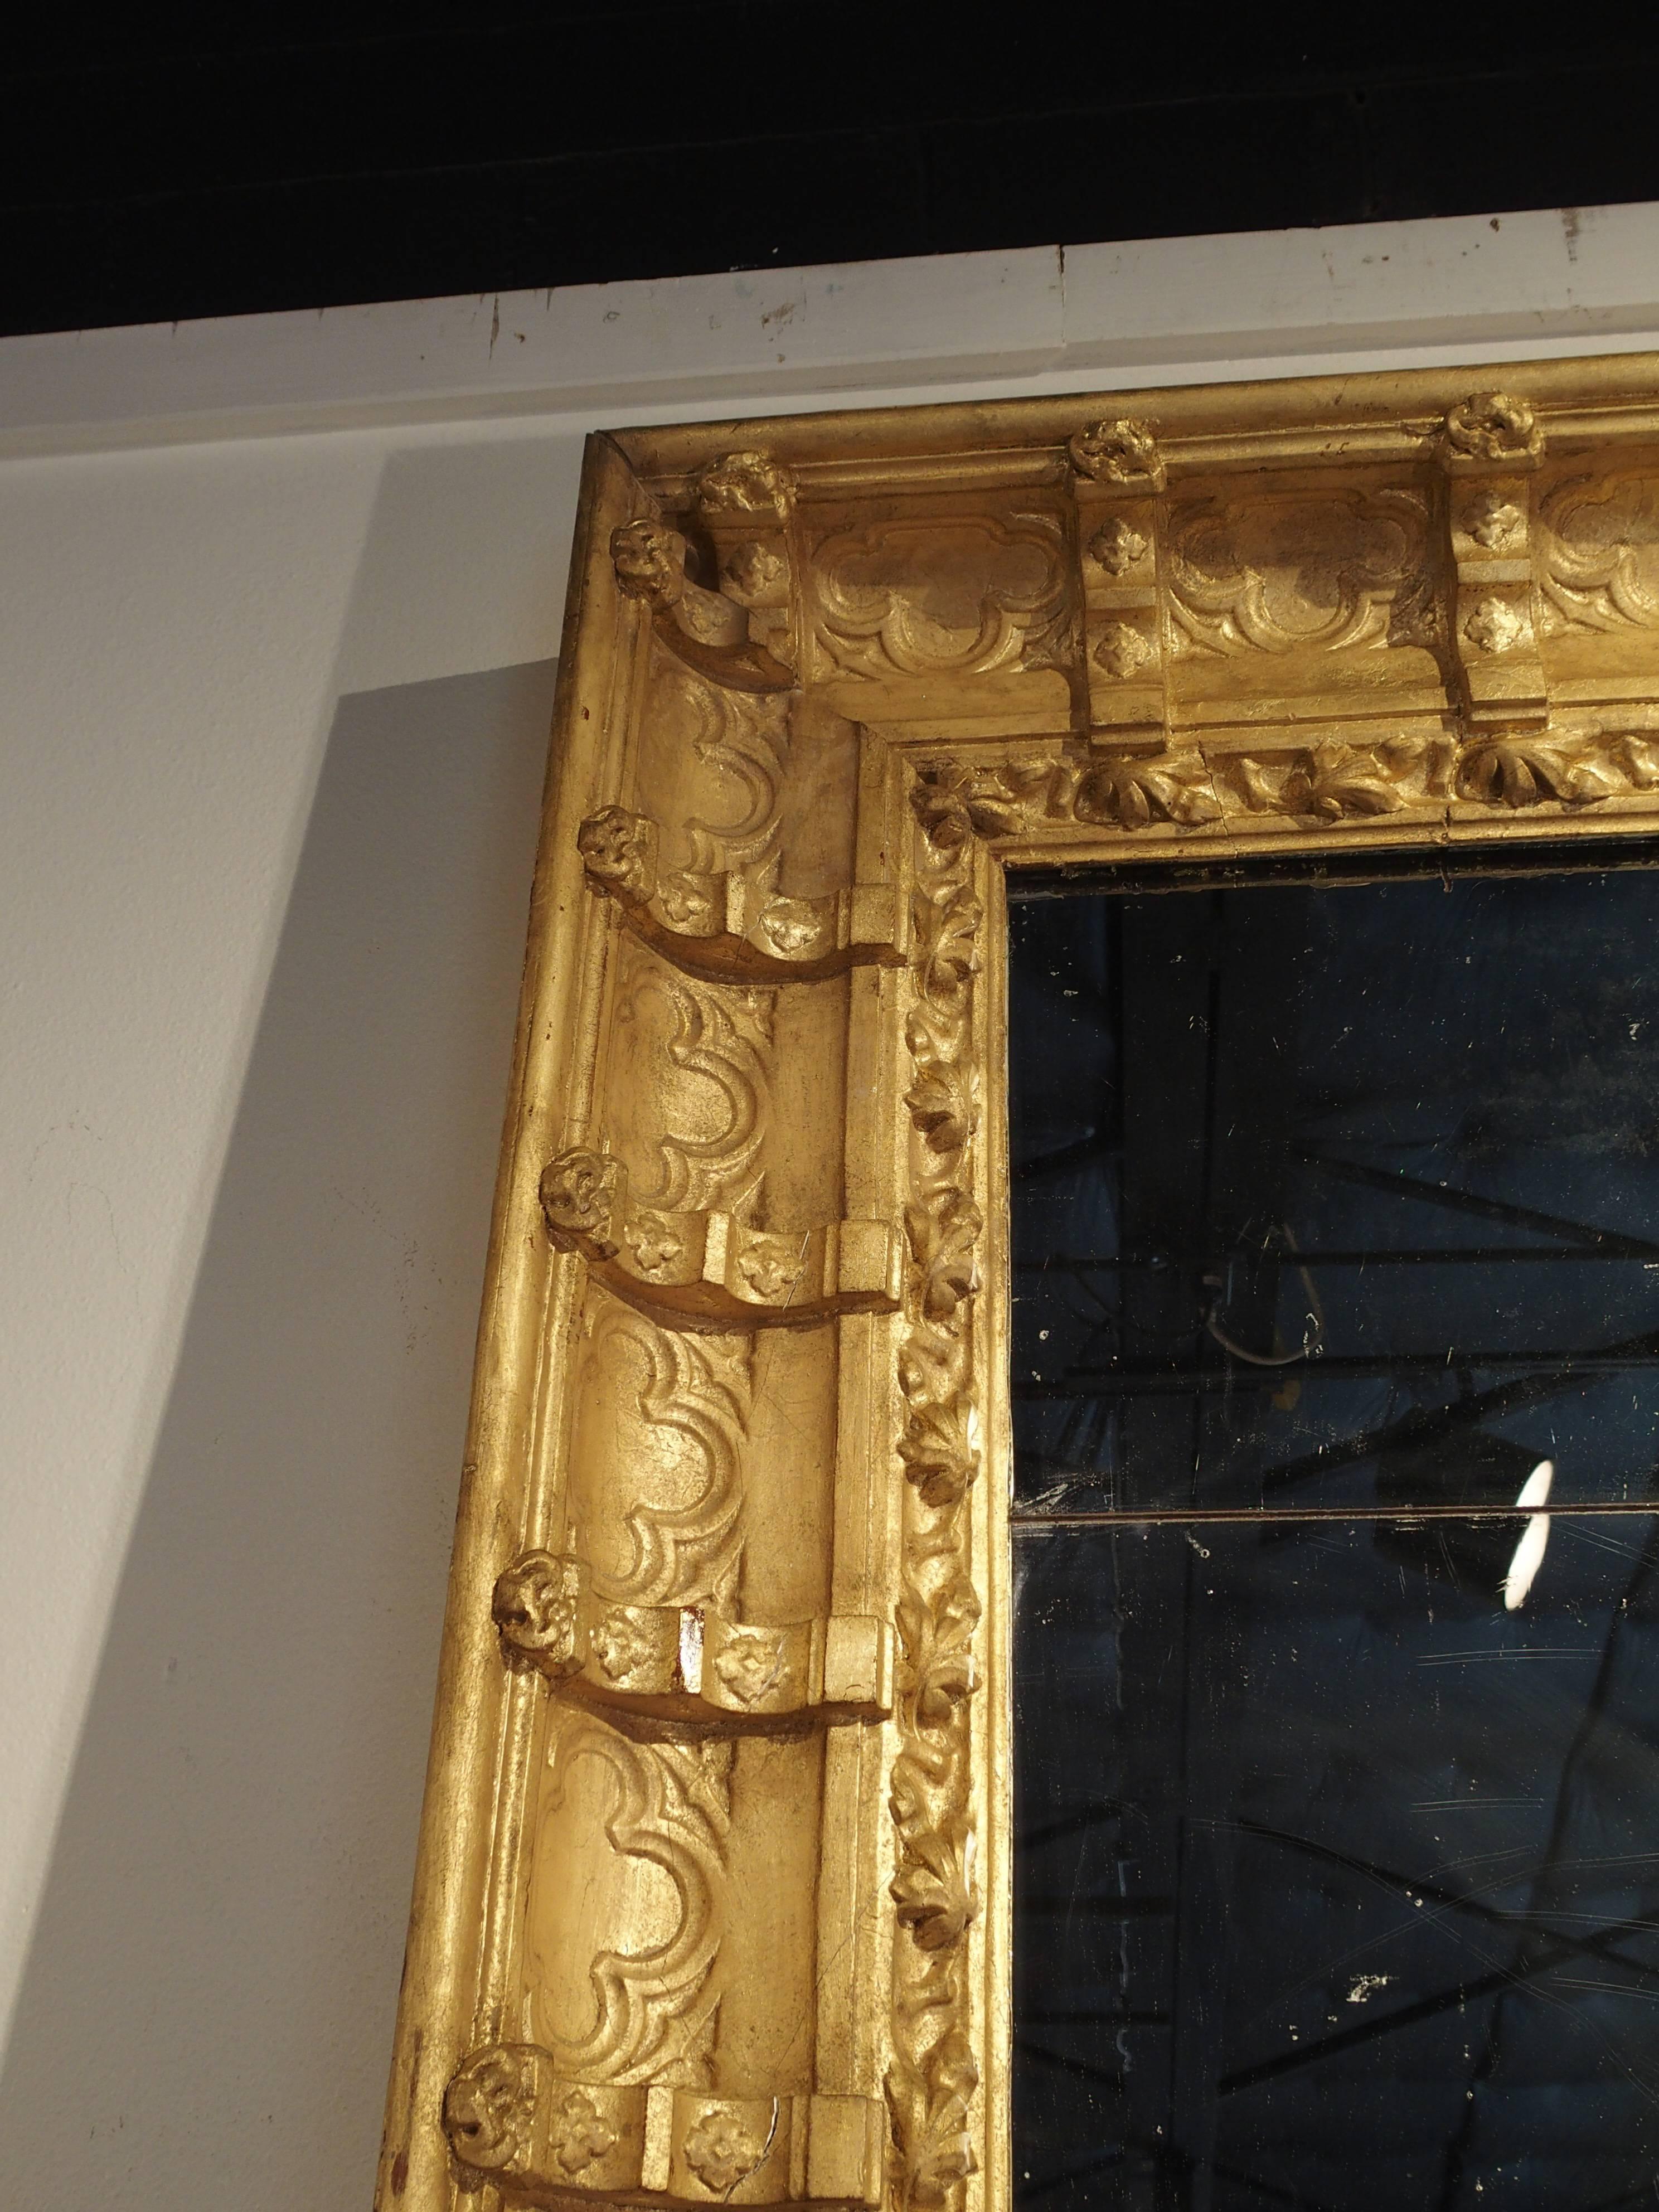 This very large and dramatic mirror is constructed from 19th century glass mirrors and crown moldings from a room in a petite chateau in Provence. The elements are period Napoleon III and the gilding was done more recently. The individual mirrored